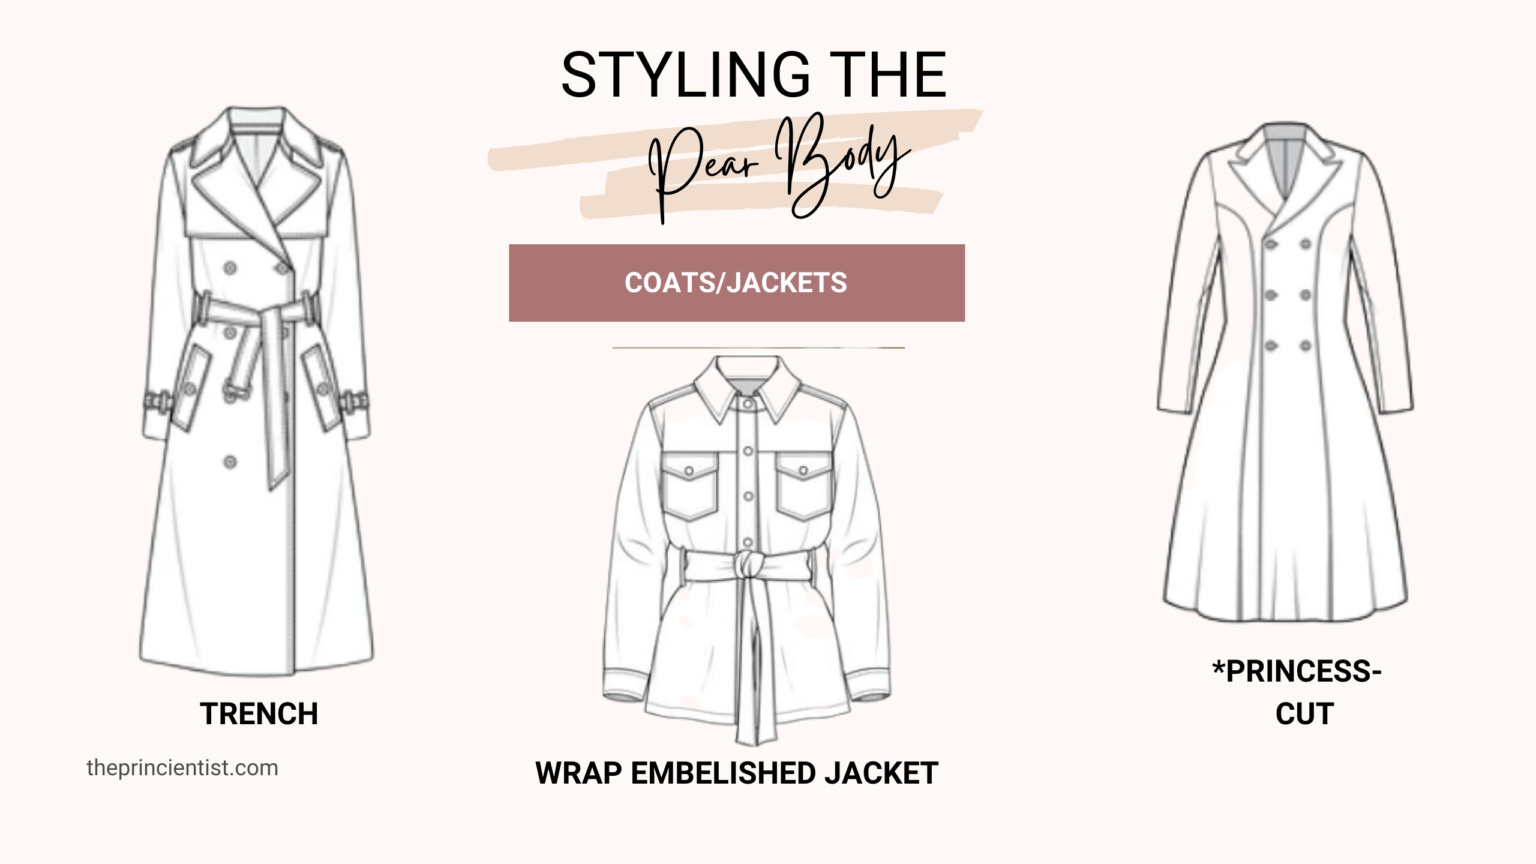 how to dress the pear shaped body - coats/jackets for the pear body 2